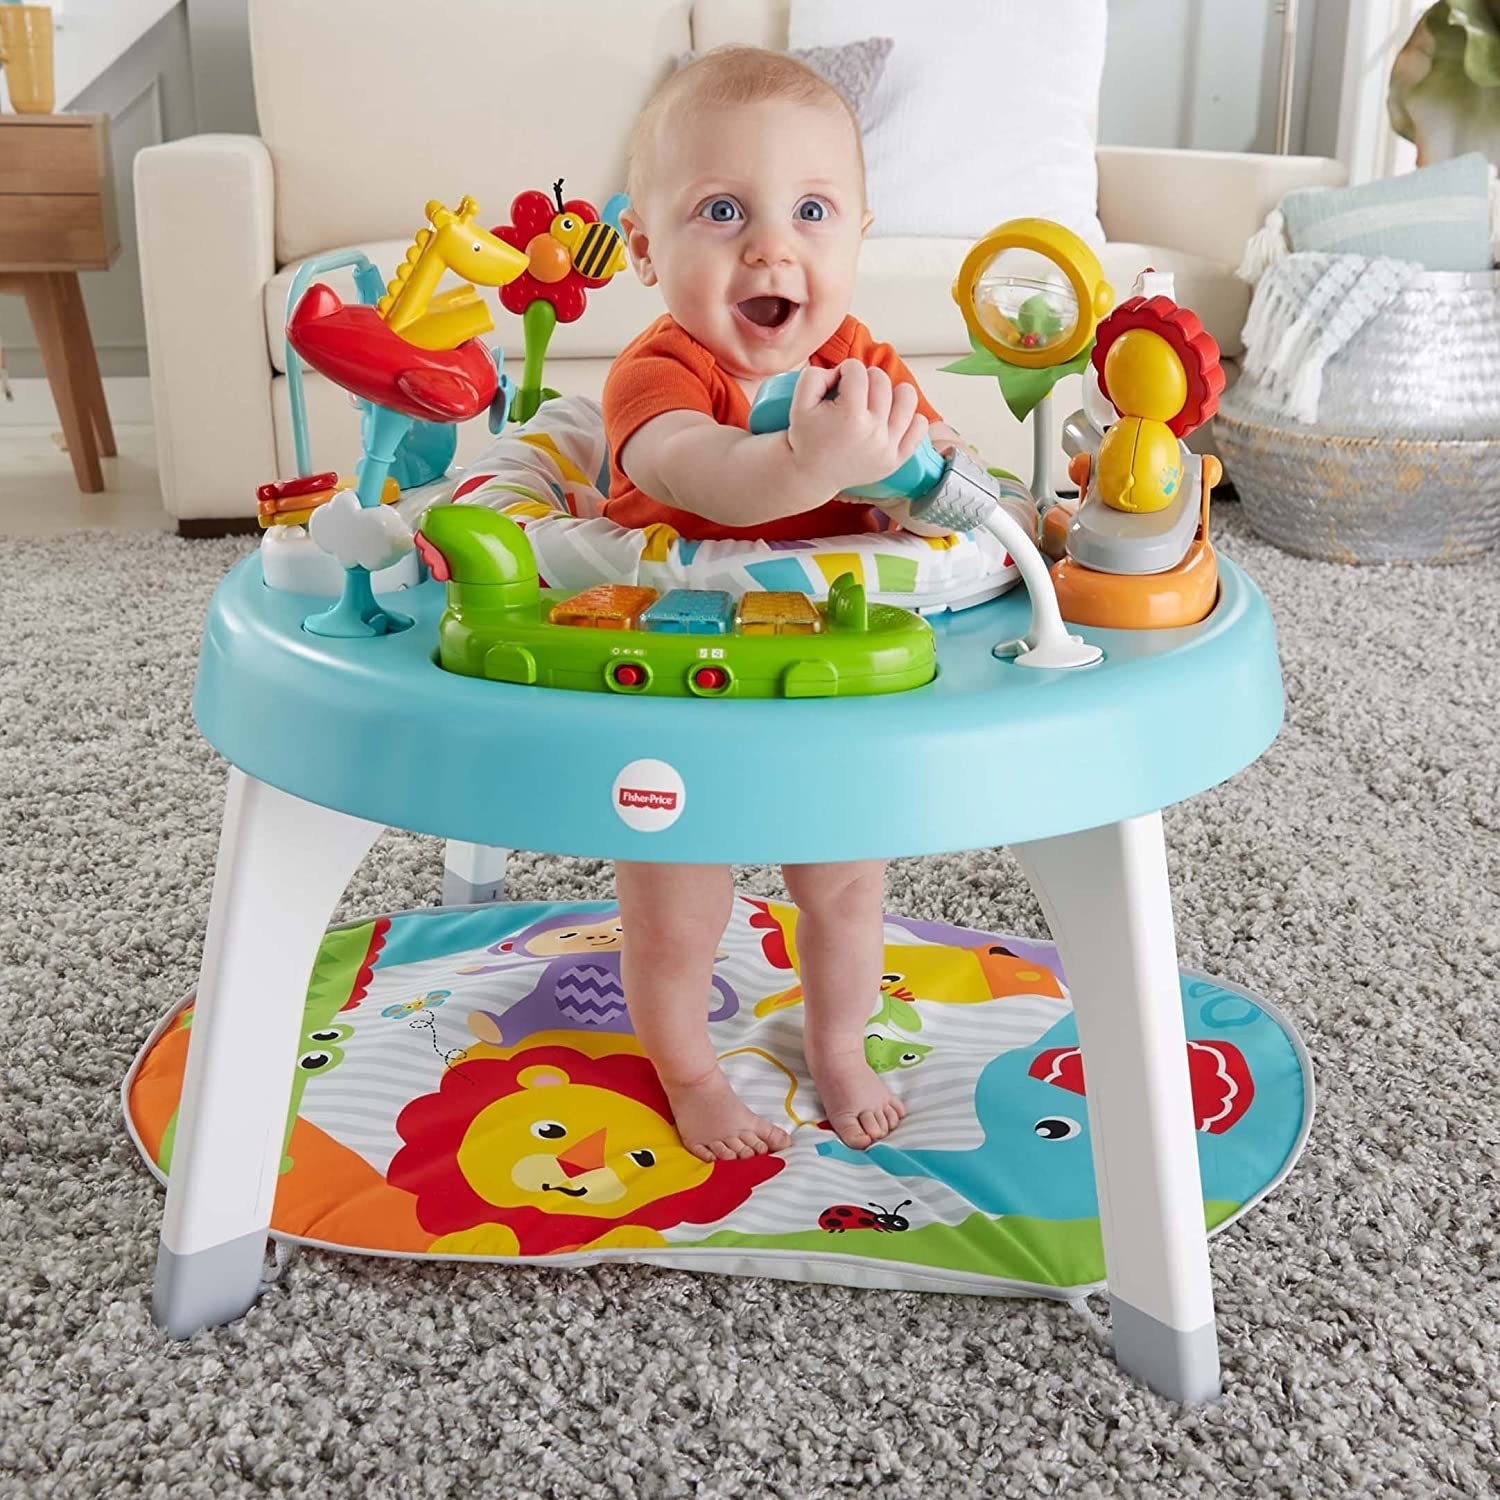 Products For Your Baby That Might Keep Them Busy For A Bit